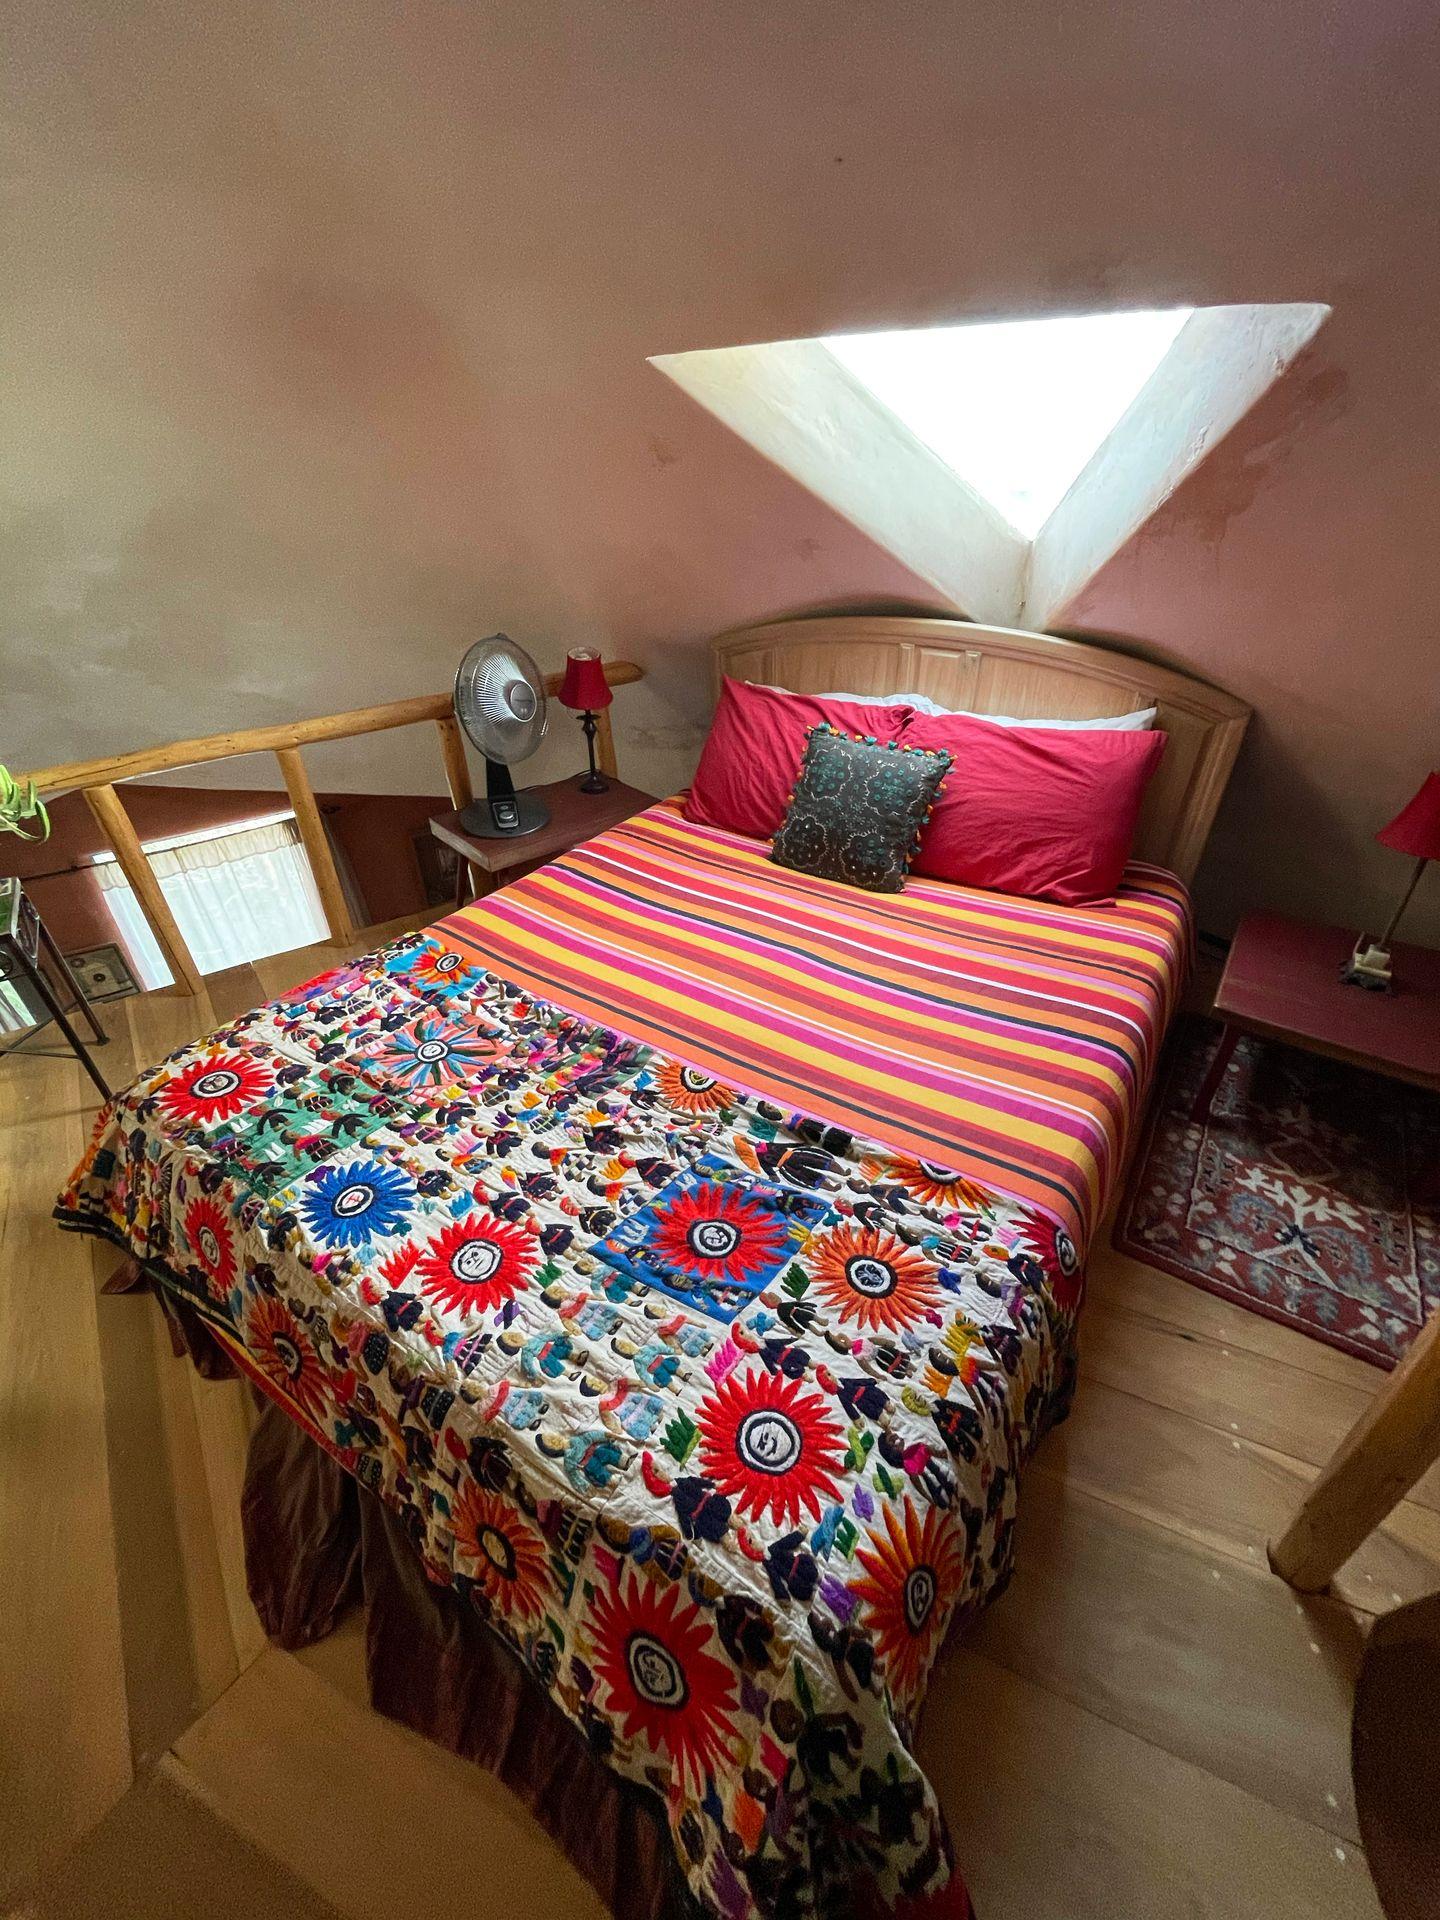 A colorful bed spread with a triangle shaped window above it inside the Dome House.